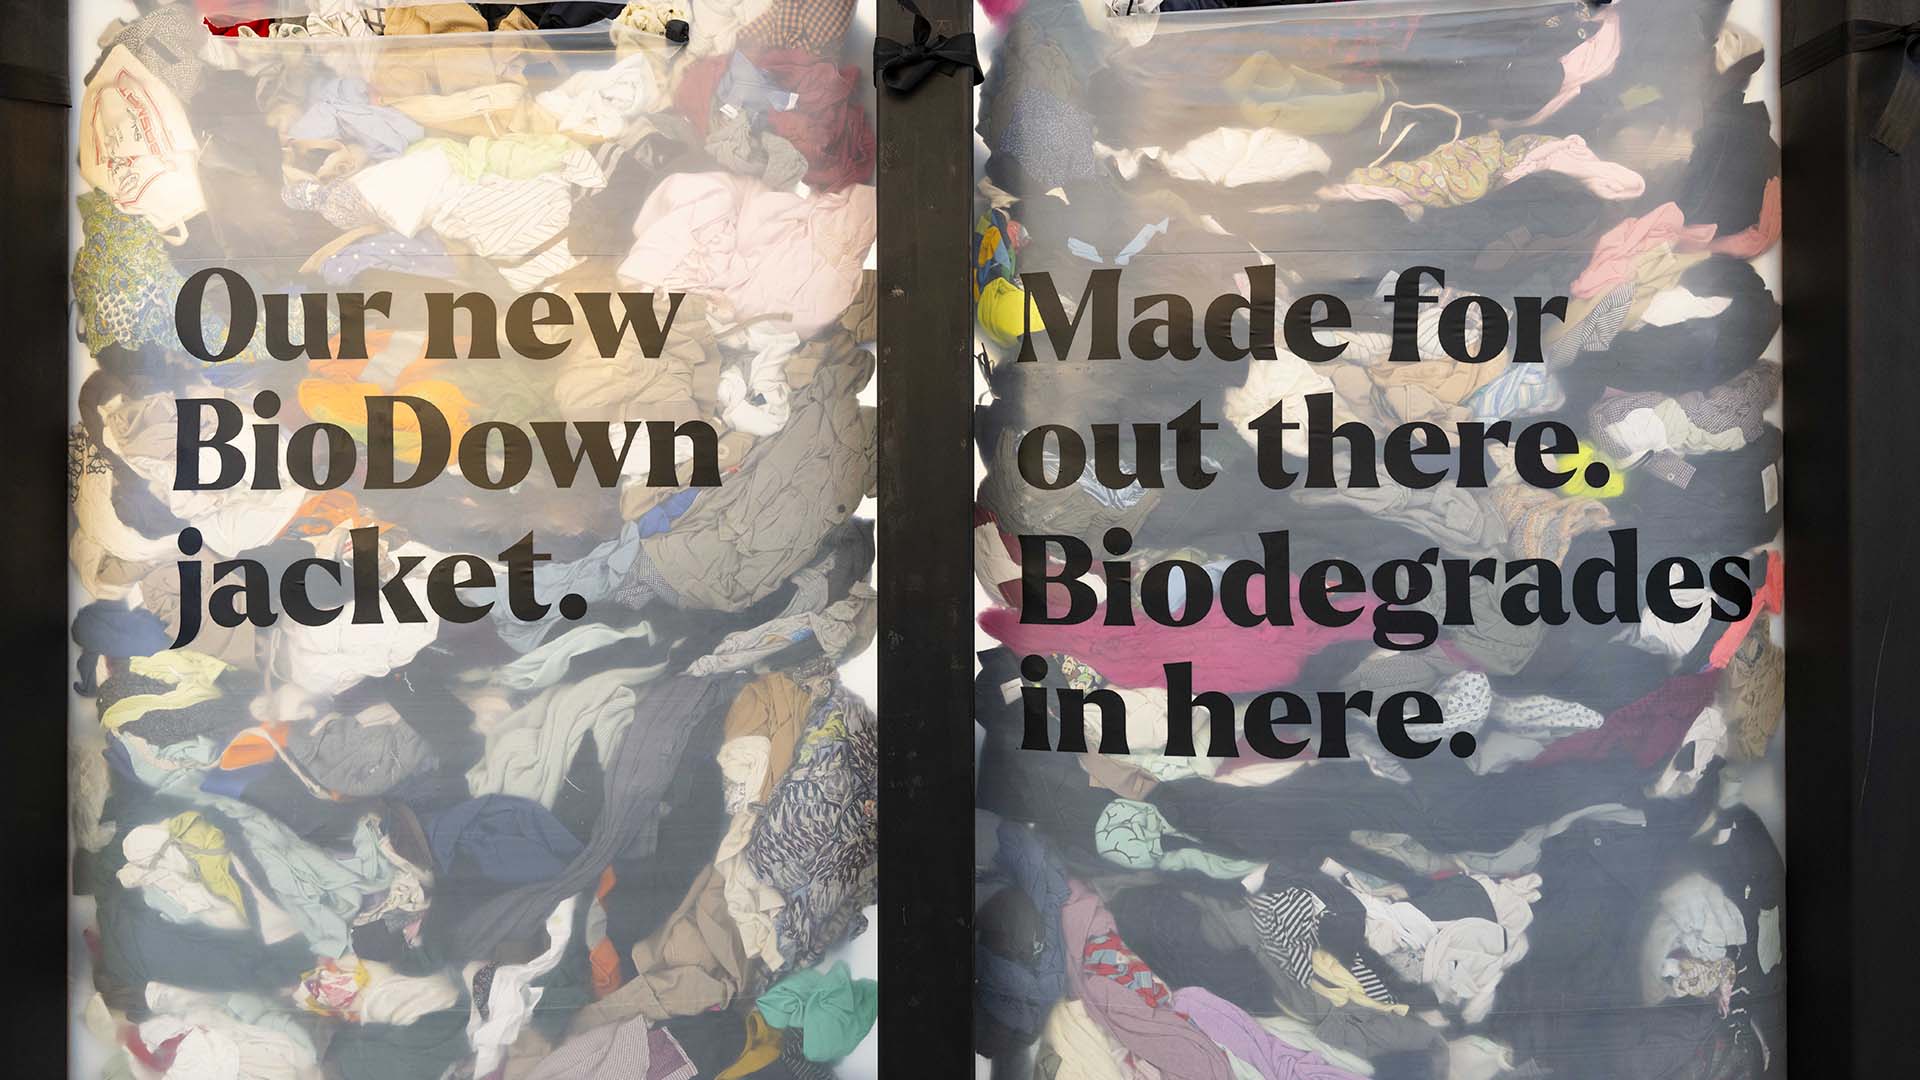 Kathmandu and Joost Bakker Have Filled Federation Square with 3000-Plus Kilograms of Fashion Waste